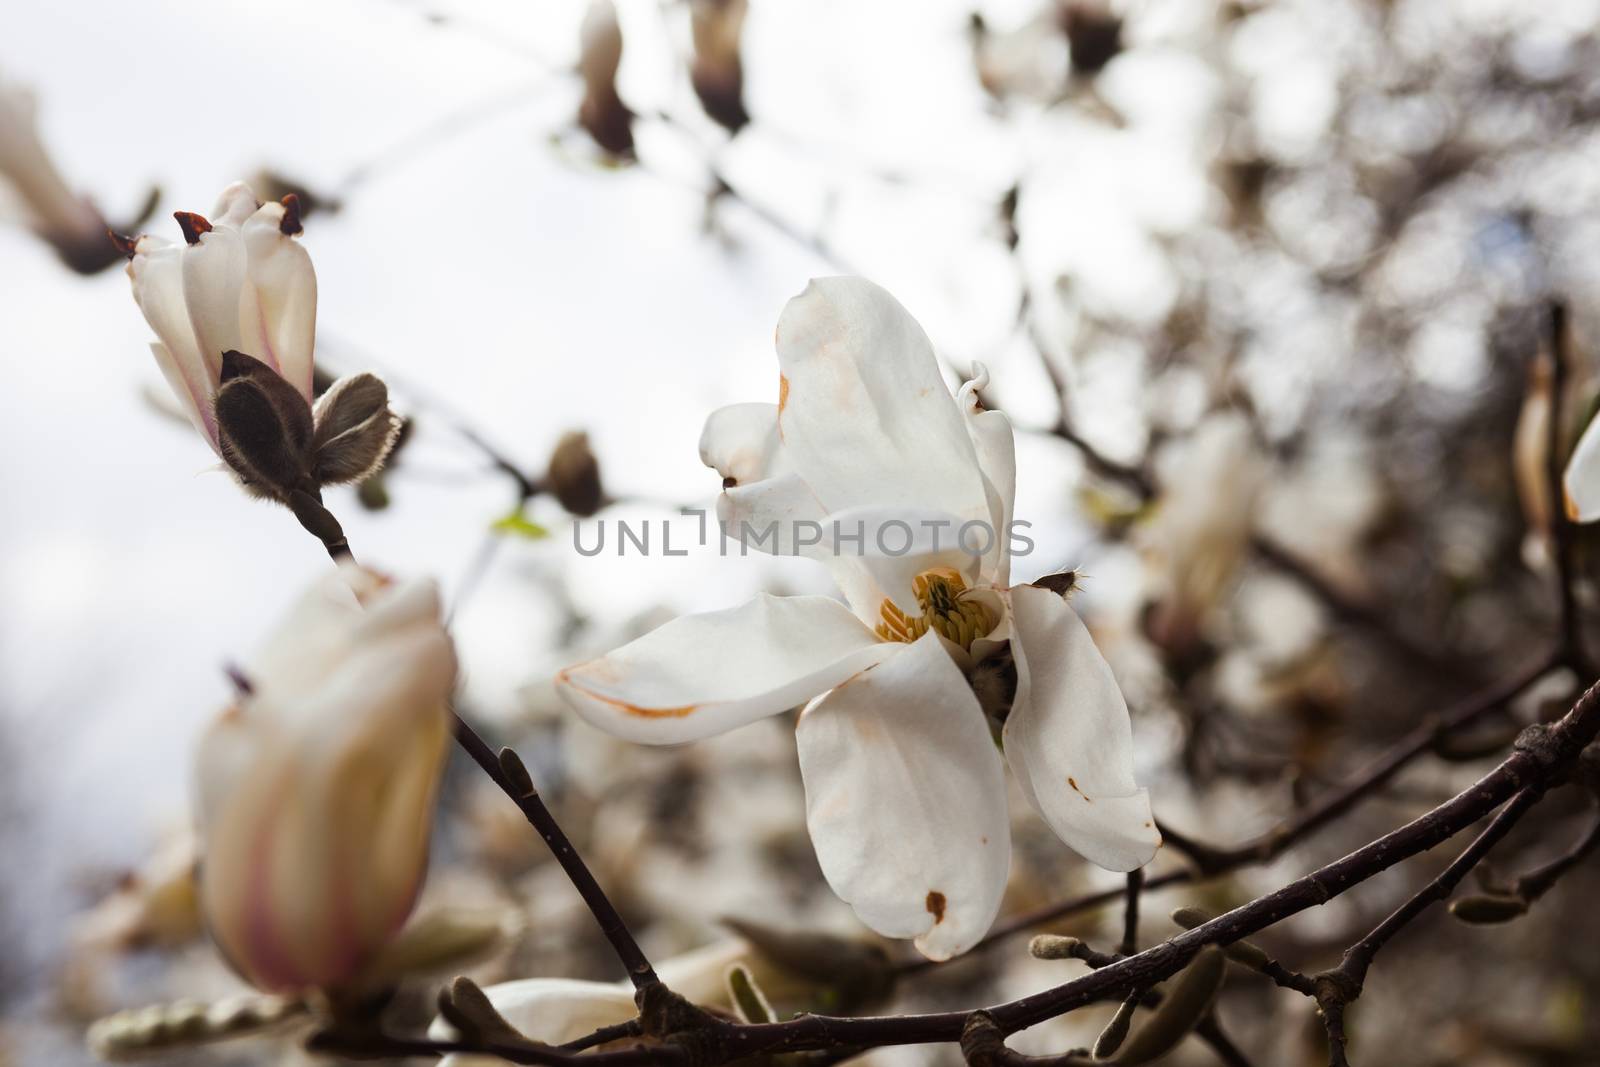 White flowers of the magnolia tree in early spring by rootstocks